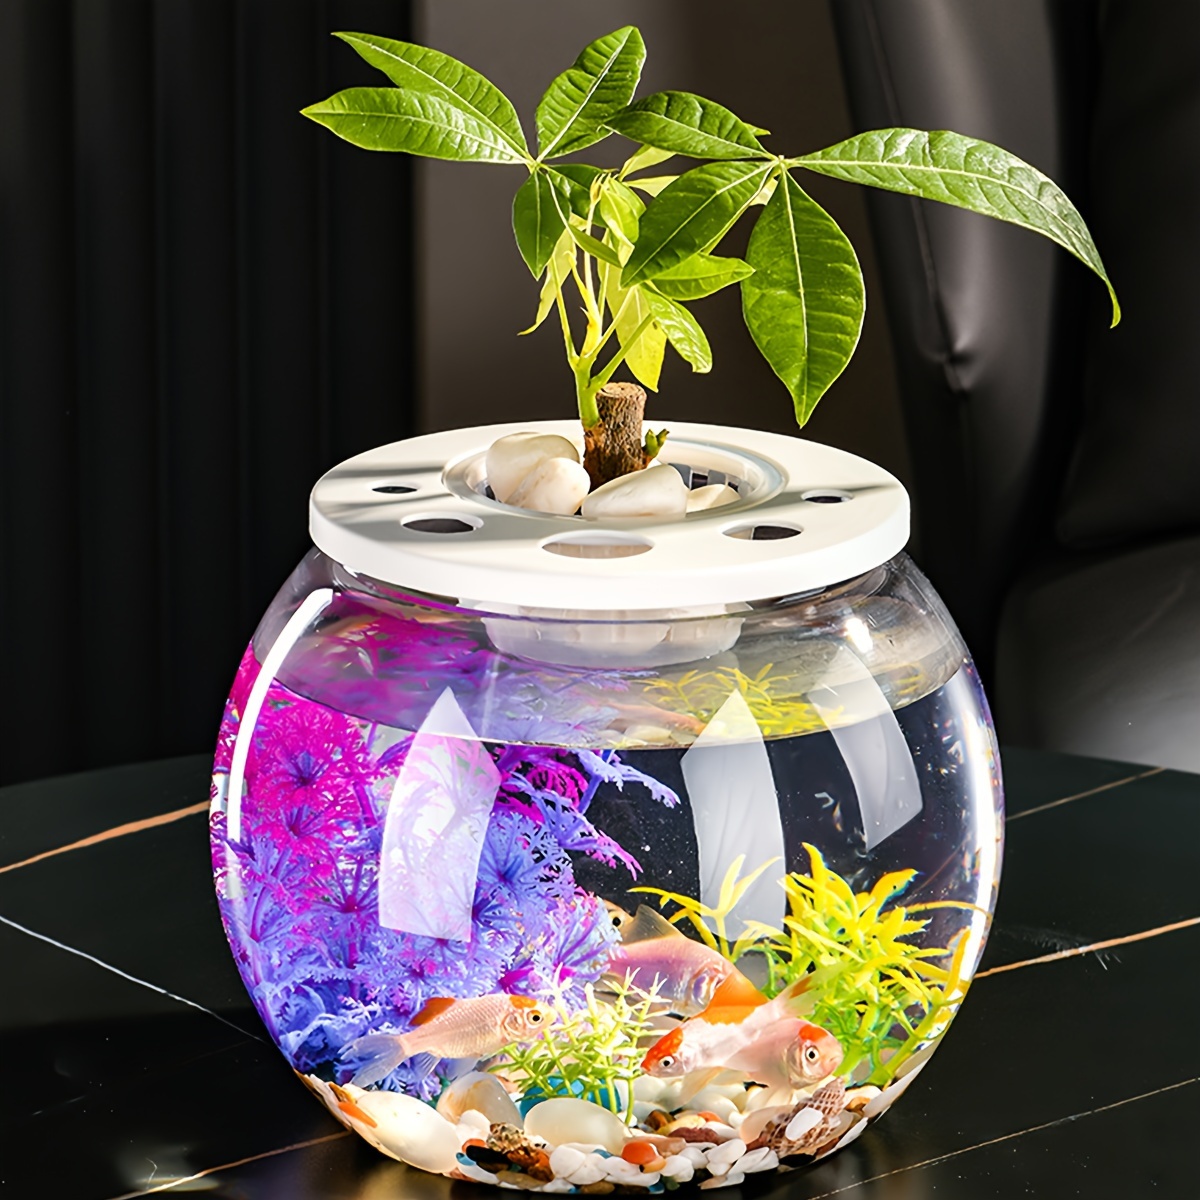 1pc Small Covered Fish Tank For Landscaping, Plastic Small Goldfish Tank  For Living Room, Green Plant Hydroponic Ecological Tank For Bedroom, Desk,  Go